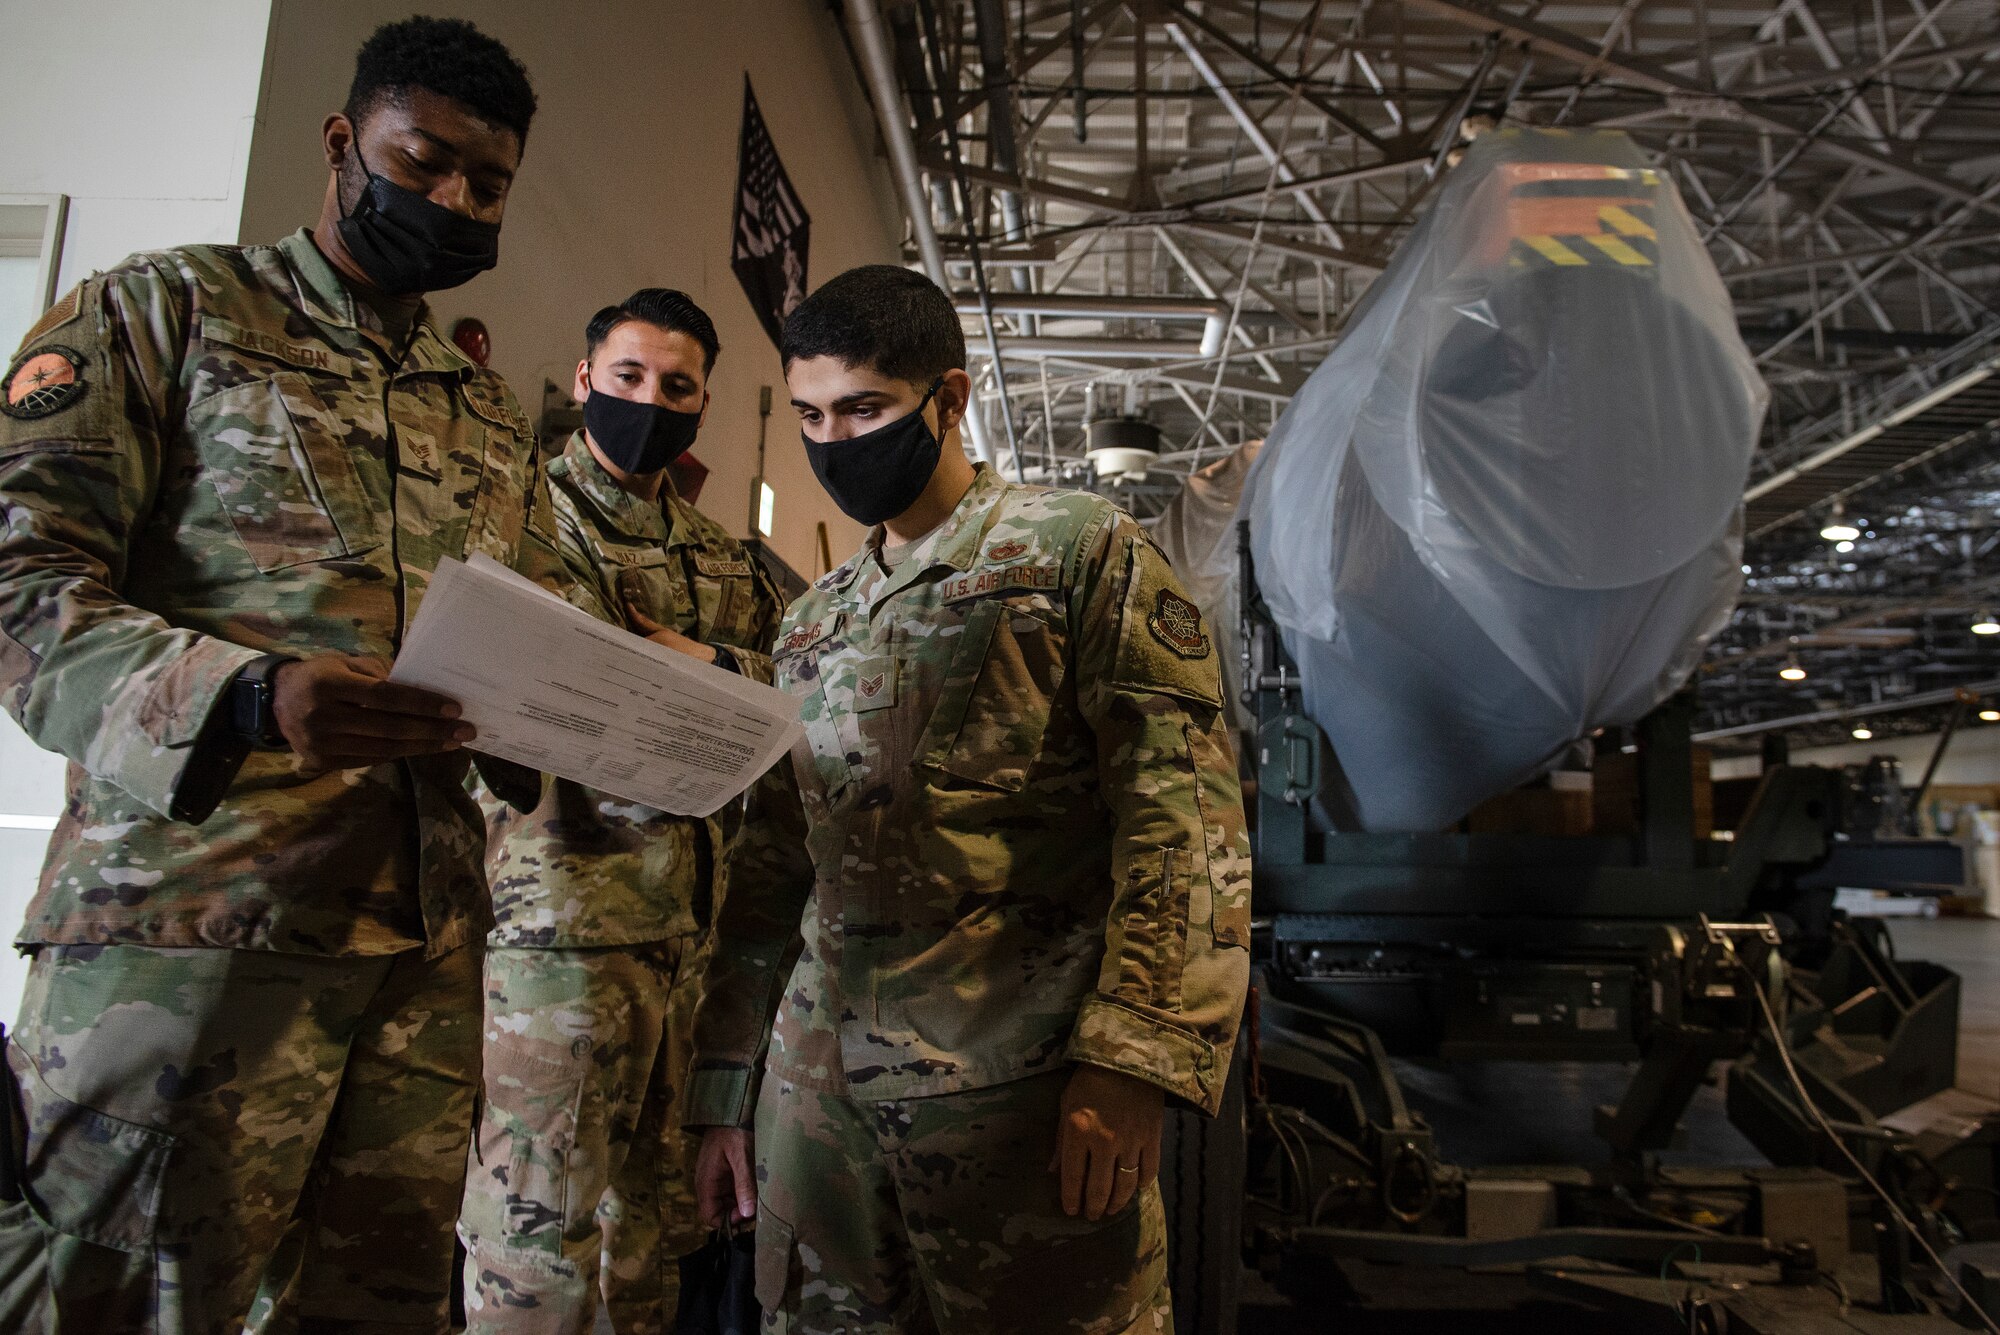 From left to right, Staff Sgt. Donald Jackson, 730th Air Mobility Squadron freight supervisor, Staff Sgt. Michael Freitas, 730th AMS aerospace propulsion craftsman, and Staff Sgt. Michael Freitas, 730th AMS air freight shift supervisor, inspect and prepare a C-17 engine to be loaded onto a C-17 Globemaster III, May 4, 2021, at Yokota Air Base, Japan. The 730th AMS gave the engine to Kadena Air Base airmen assigned to the 733rd AMS to enhance their training program, allowing maintainers to navigate nomenclature and troubleshoot engine issues on a real aircraft asset. Finding ways to improve training helps increase the readiness and resilience of our force and ensures Pacific Air Forces’ ability to fight and win if needed.